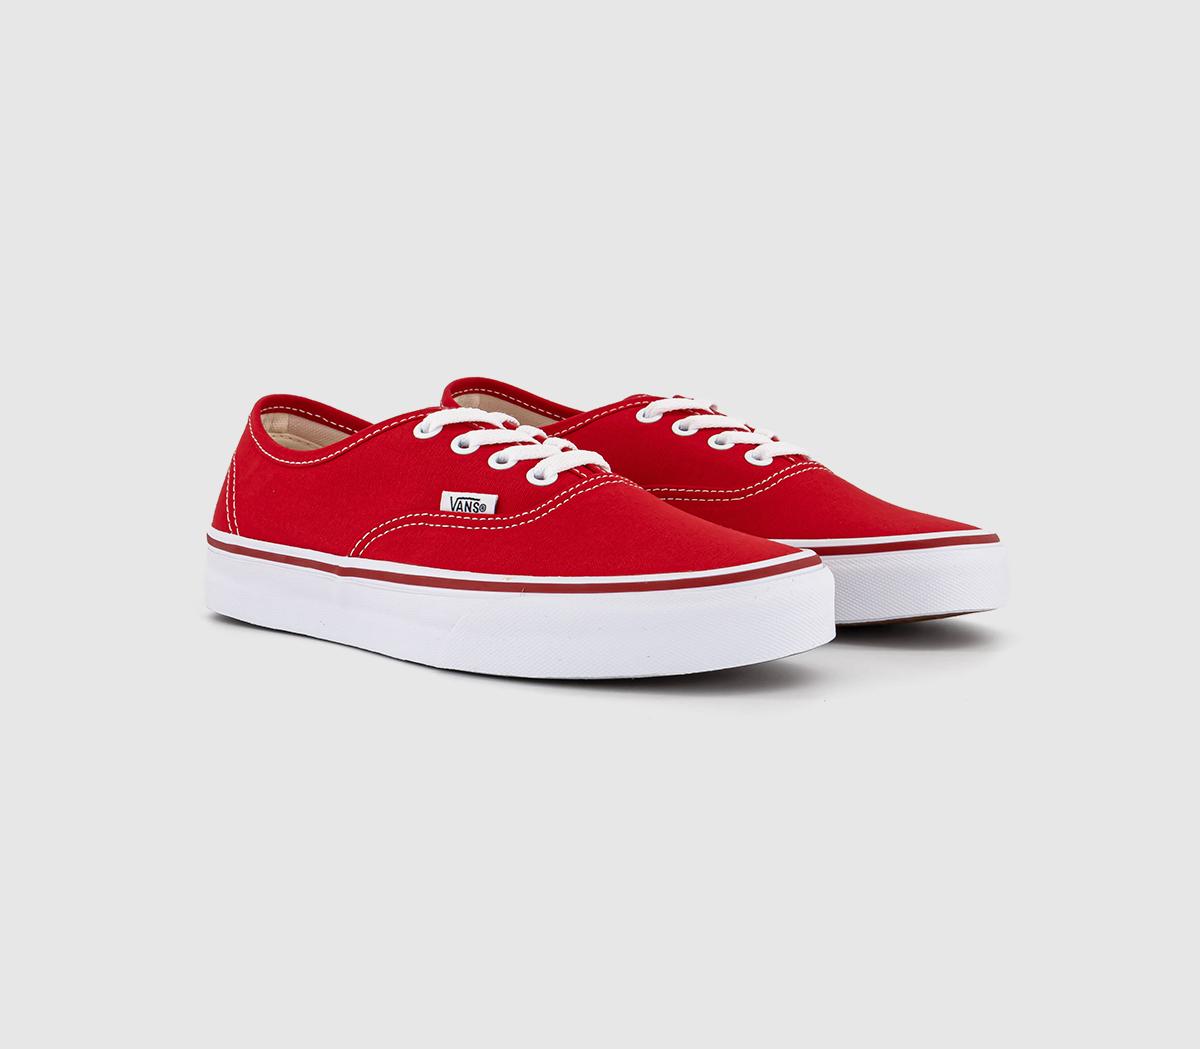 Vans Mens Authentic Red Trainers, 9